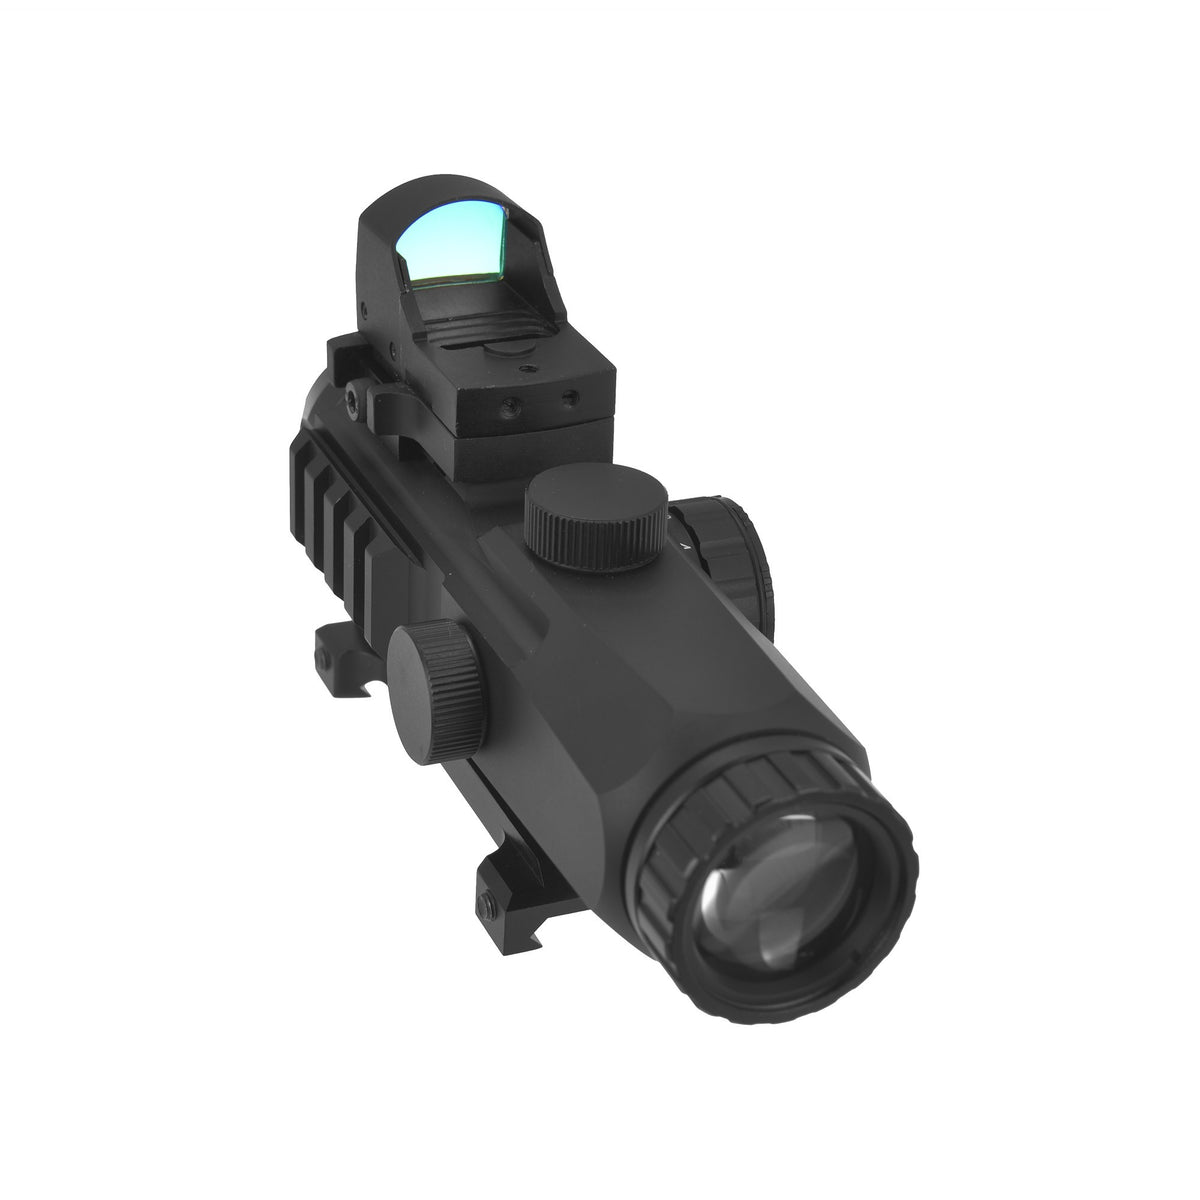 LPHM Mark4 3x24 Scope with Mini Red Dot